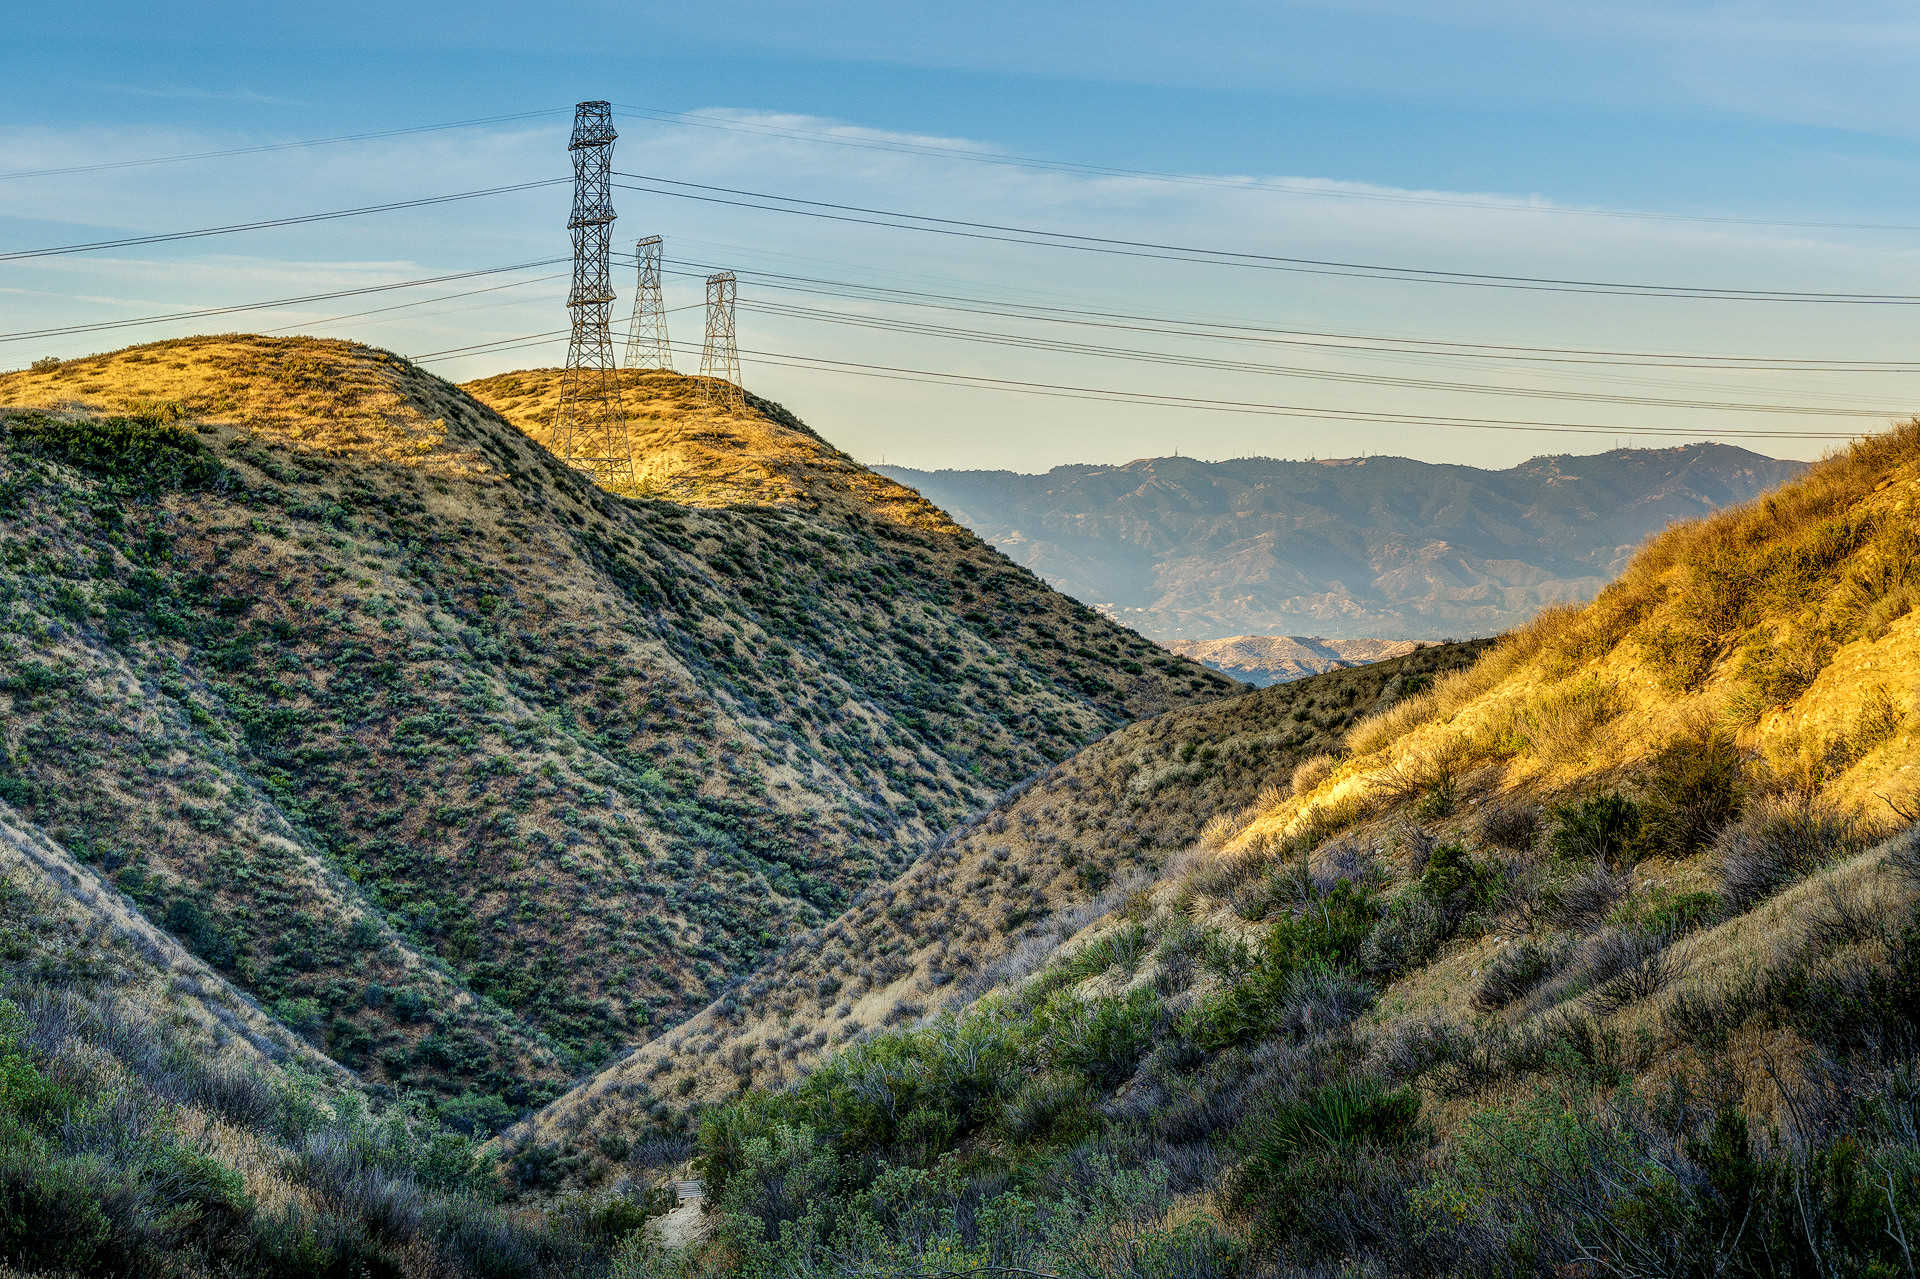 Haskell Canyon